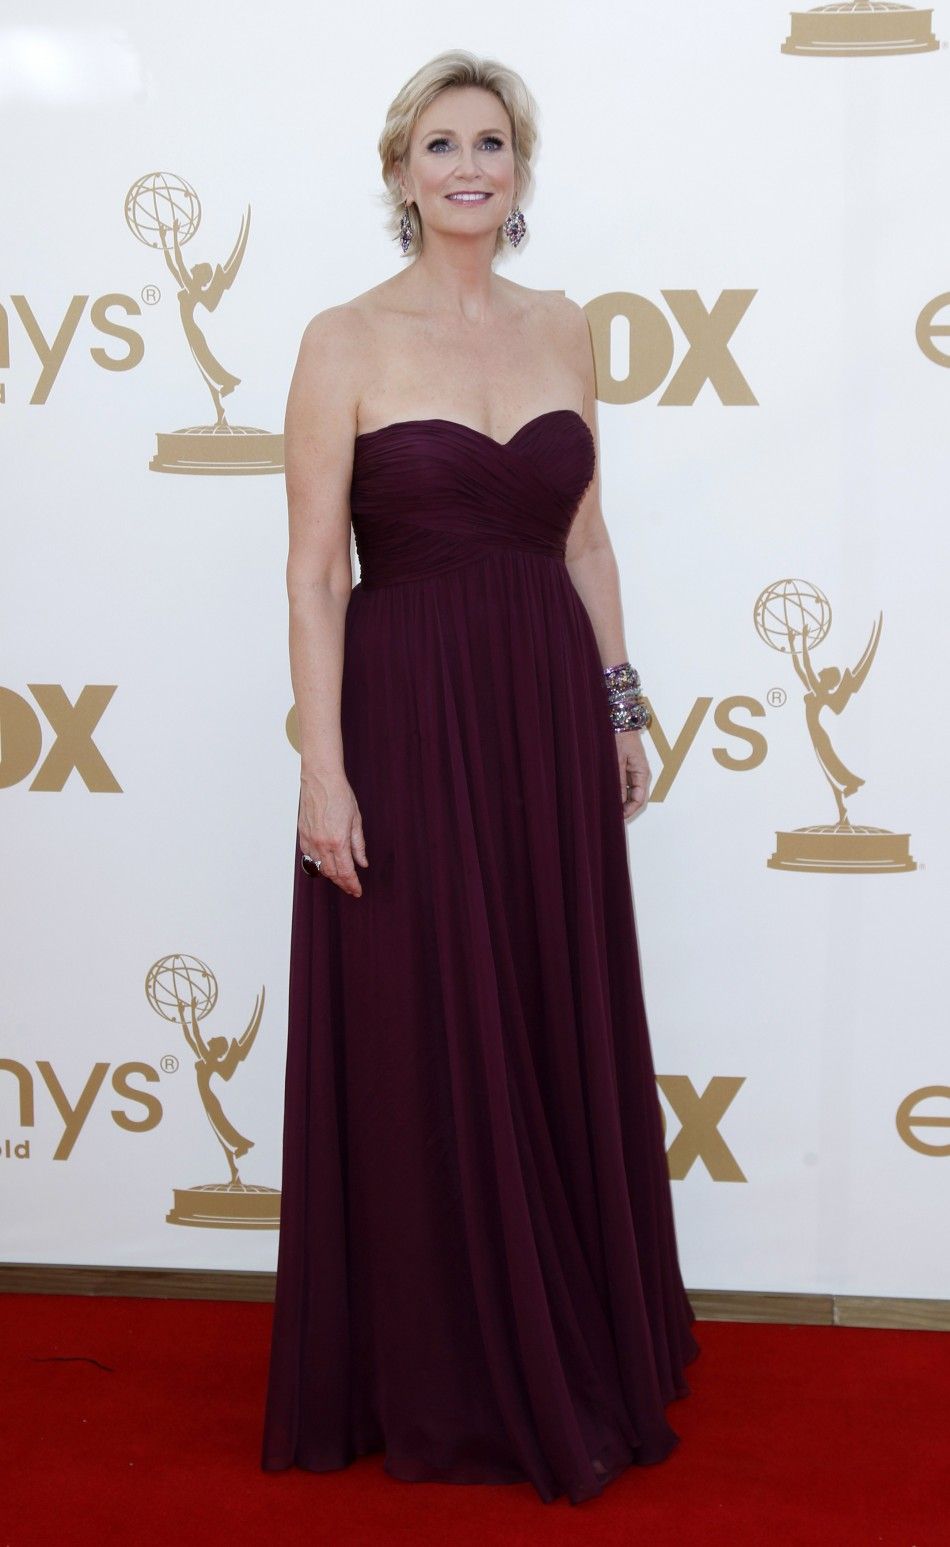 Actress and Emmy Awards host Jane Lynch at arrives at the 63rd Primetime Emmy Awards in Los Angeles September 18, 2011. 